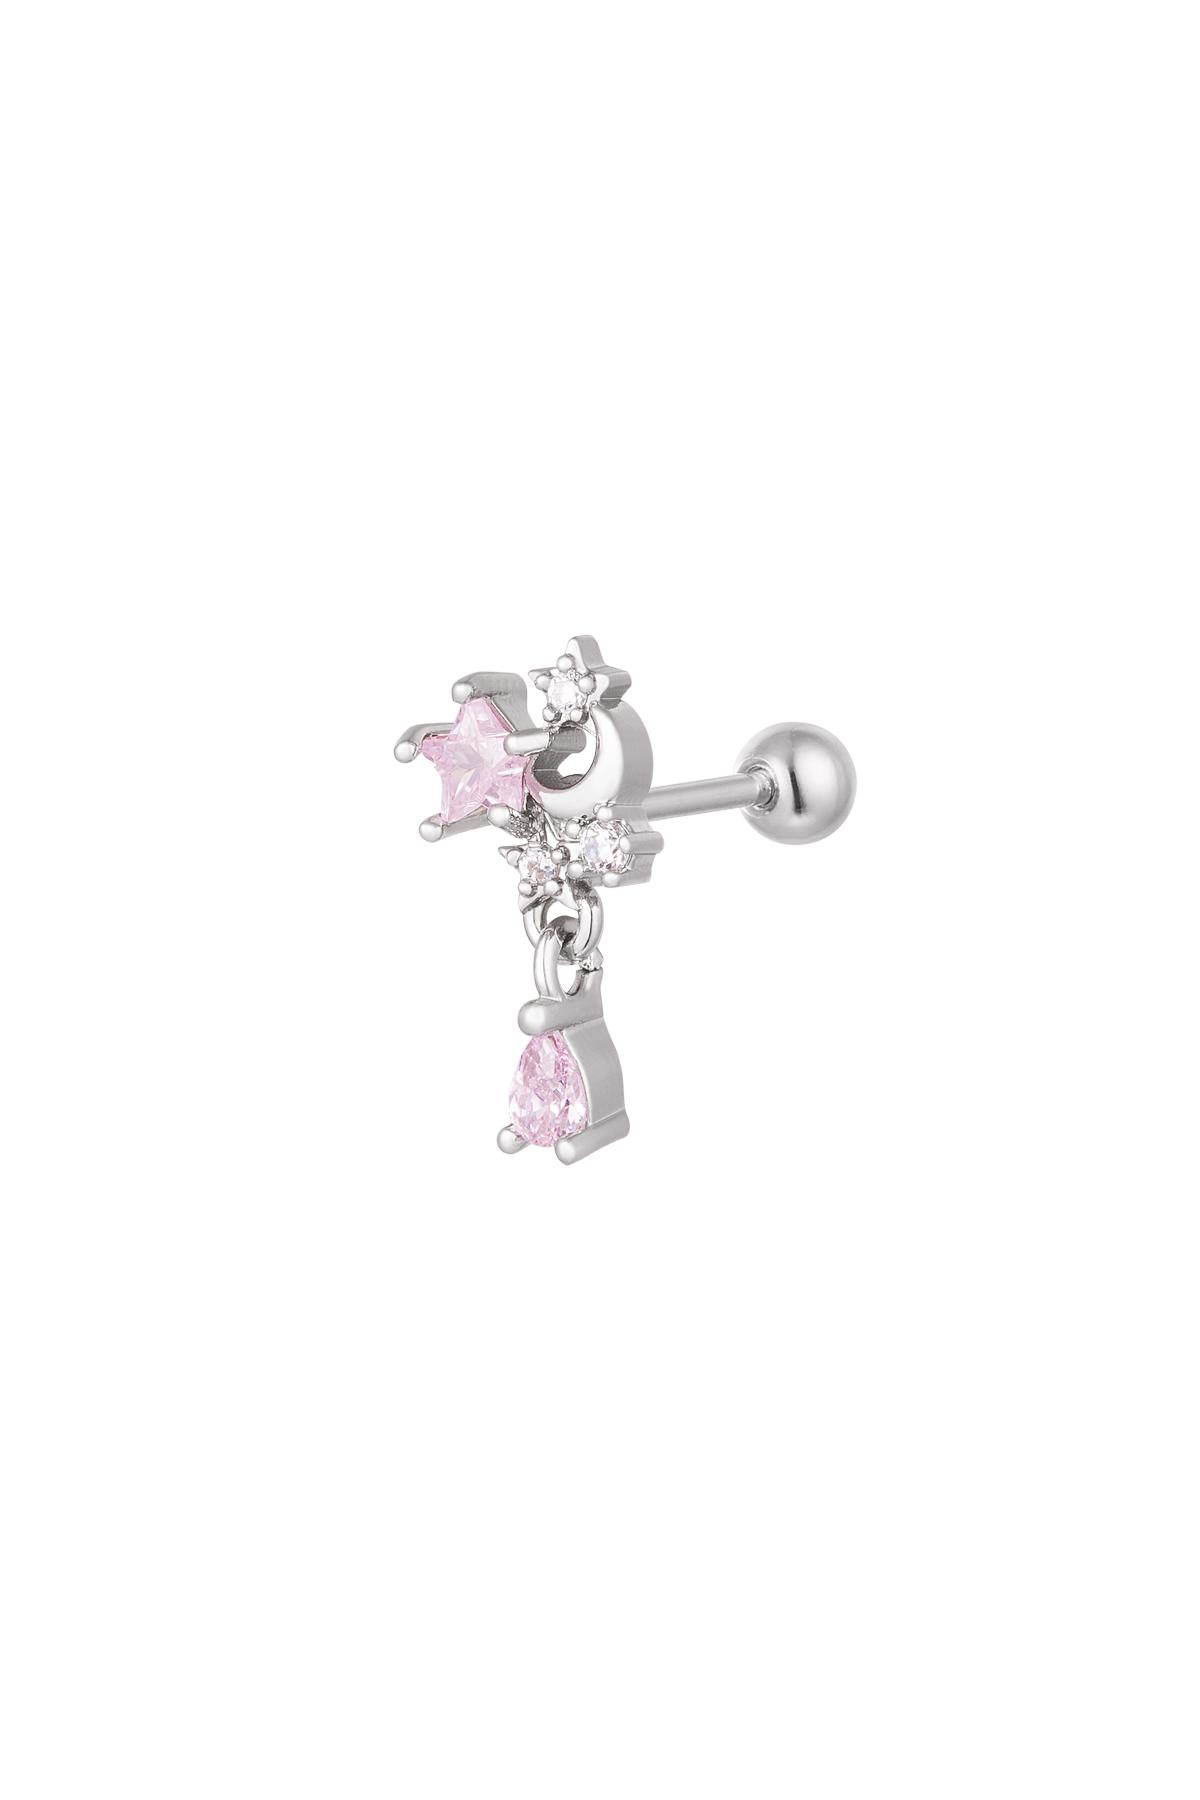 Piercing moon and star - Sparkle collection Pink & Silver Copper h5 